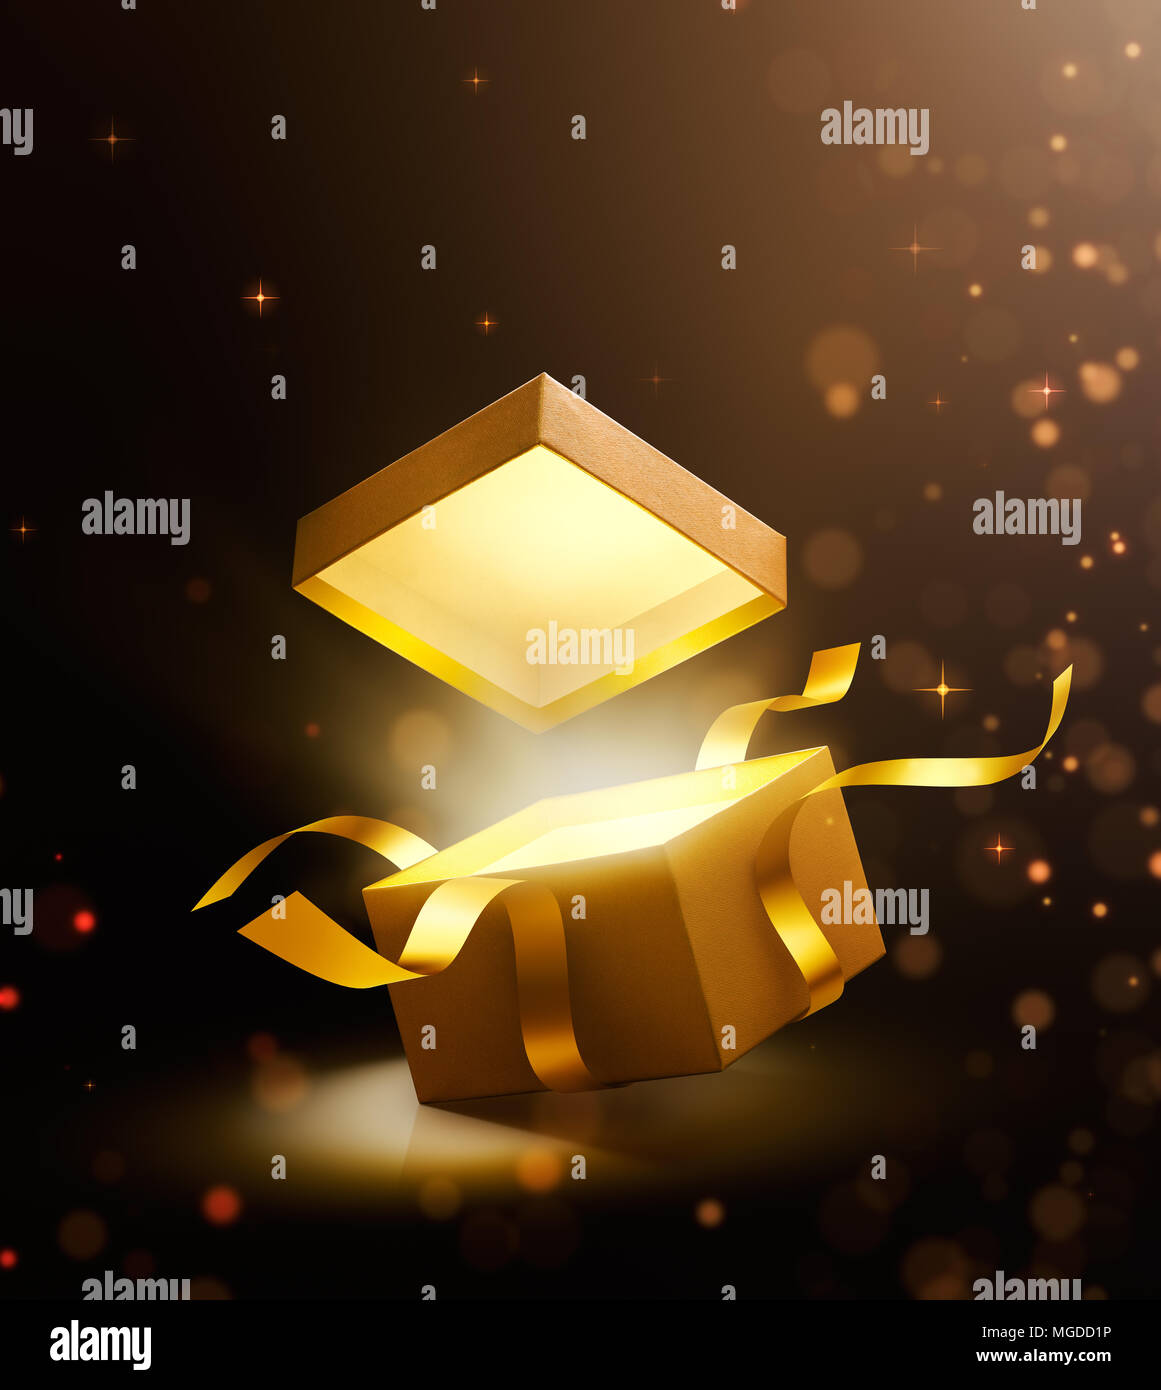 Gold open gift box with magical light Stock Photo - Alamy